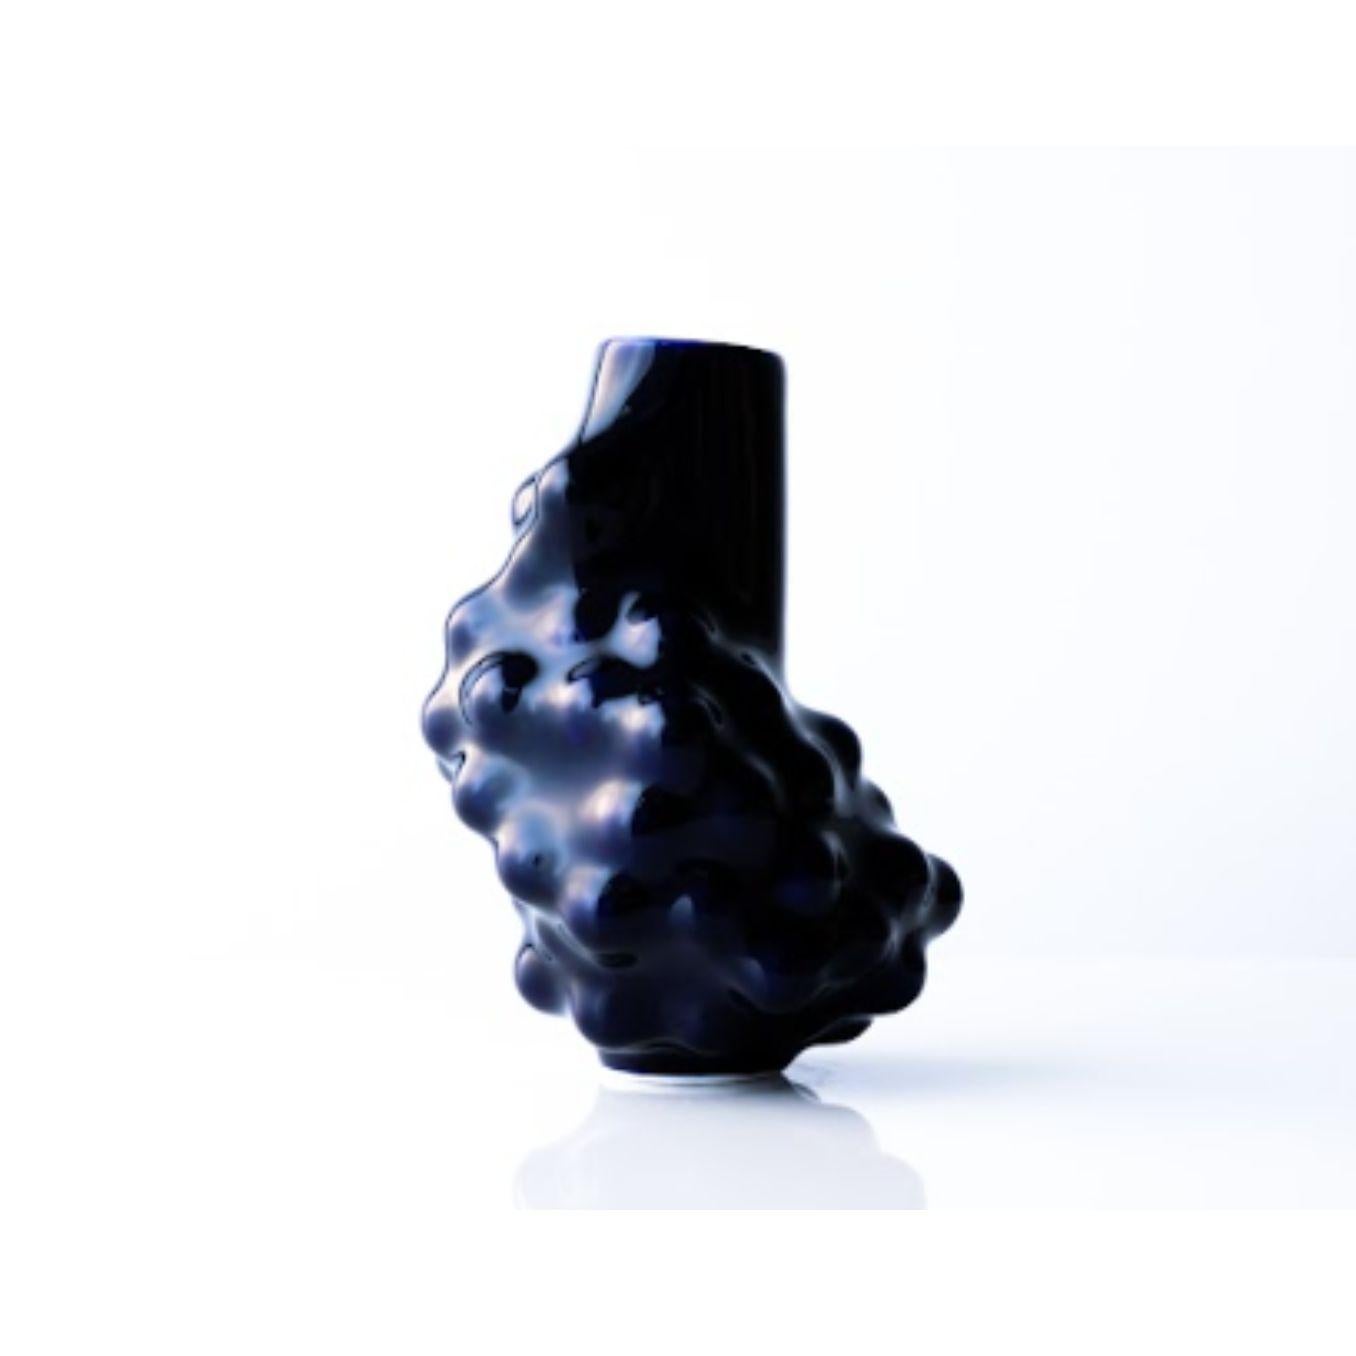 Arkadiusz Szwed Bumps 2.0 Carafe by Nów
Designed by Arkadiusz Szwed
Dimensions: D 14 x W 14 x H 20 cm
Materials: glazed porcelain, cobalt

BUMPS 2.0 is a set of ceramic objects that were created as a result of an experiment with a new, personal